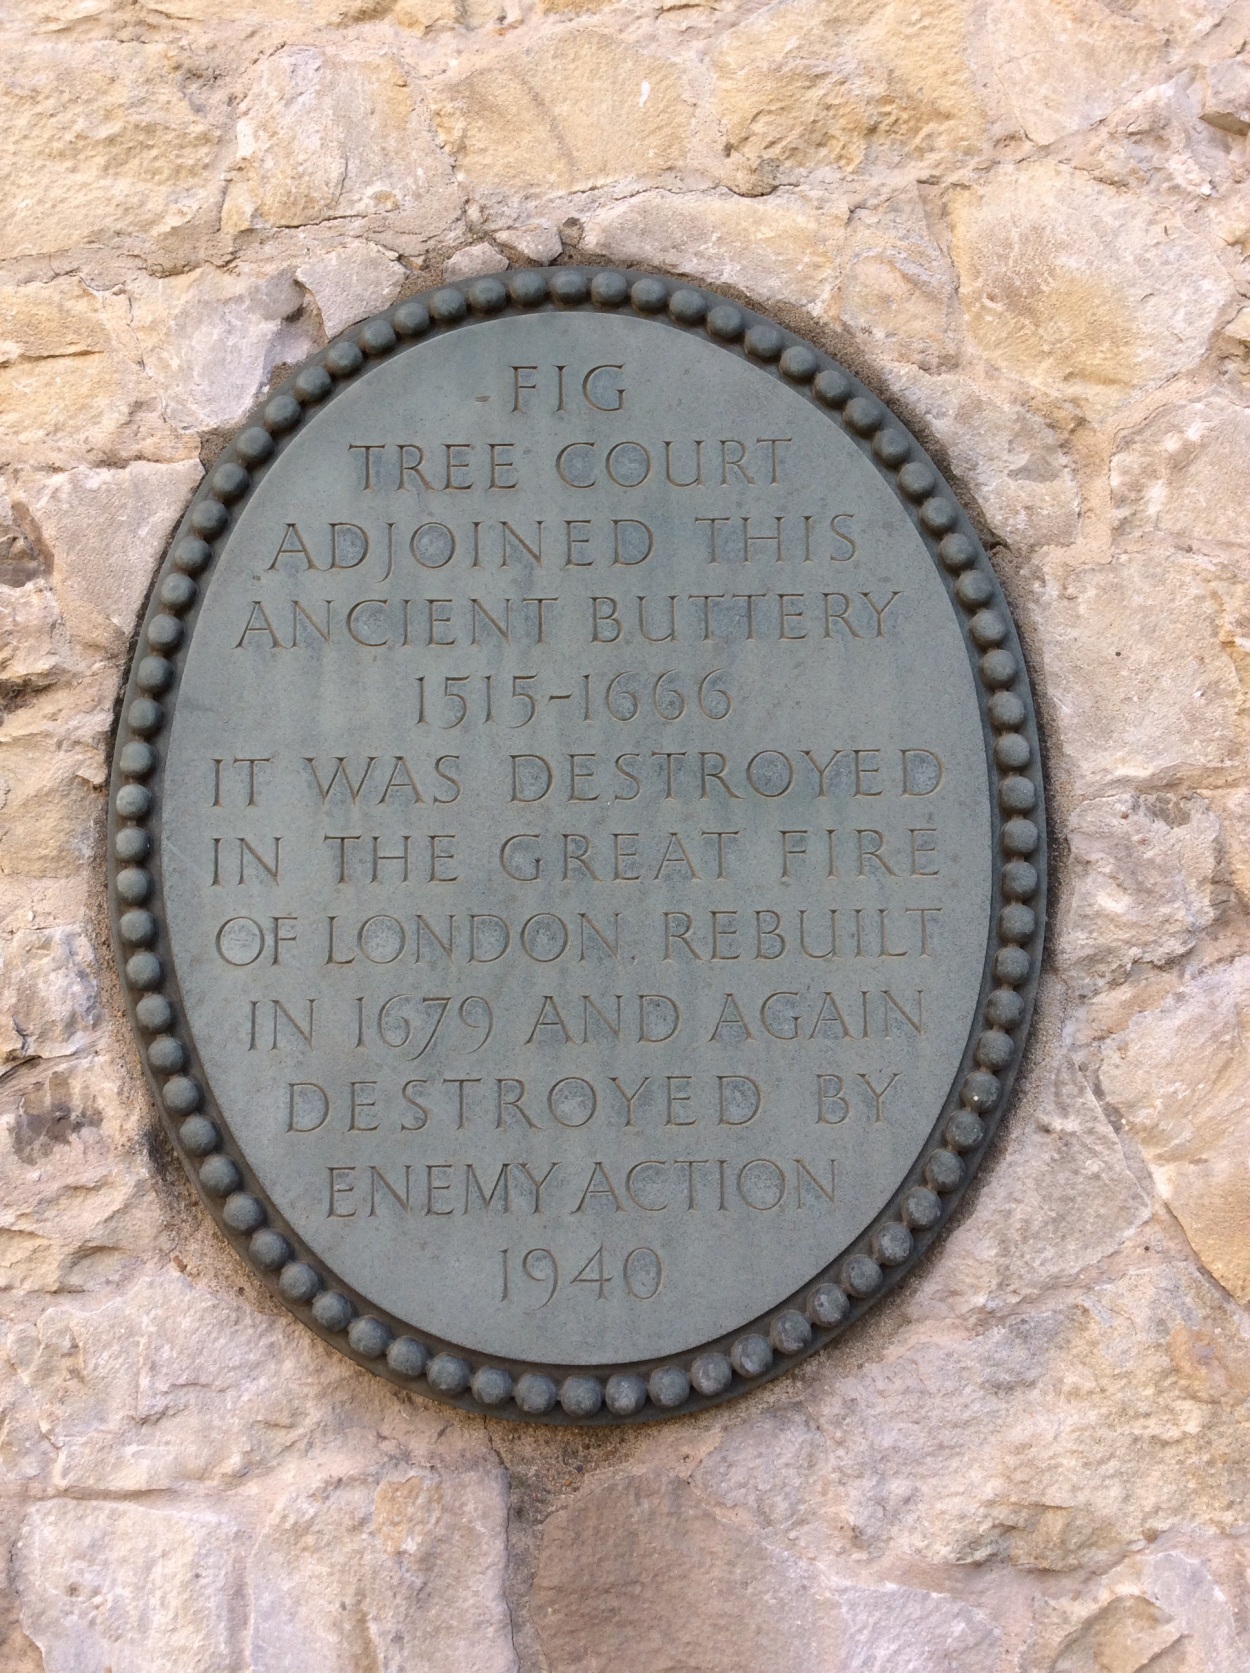 Plaque on ancient buttery mentioning Fig Tree Court